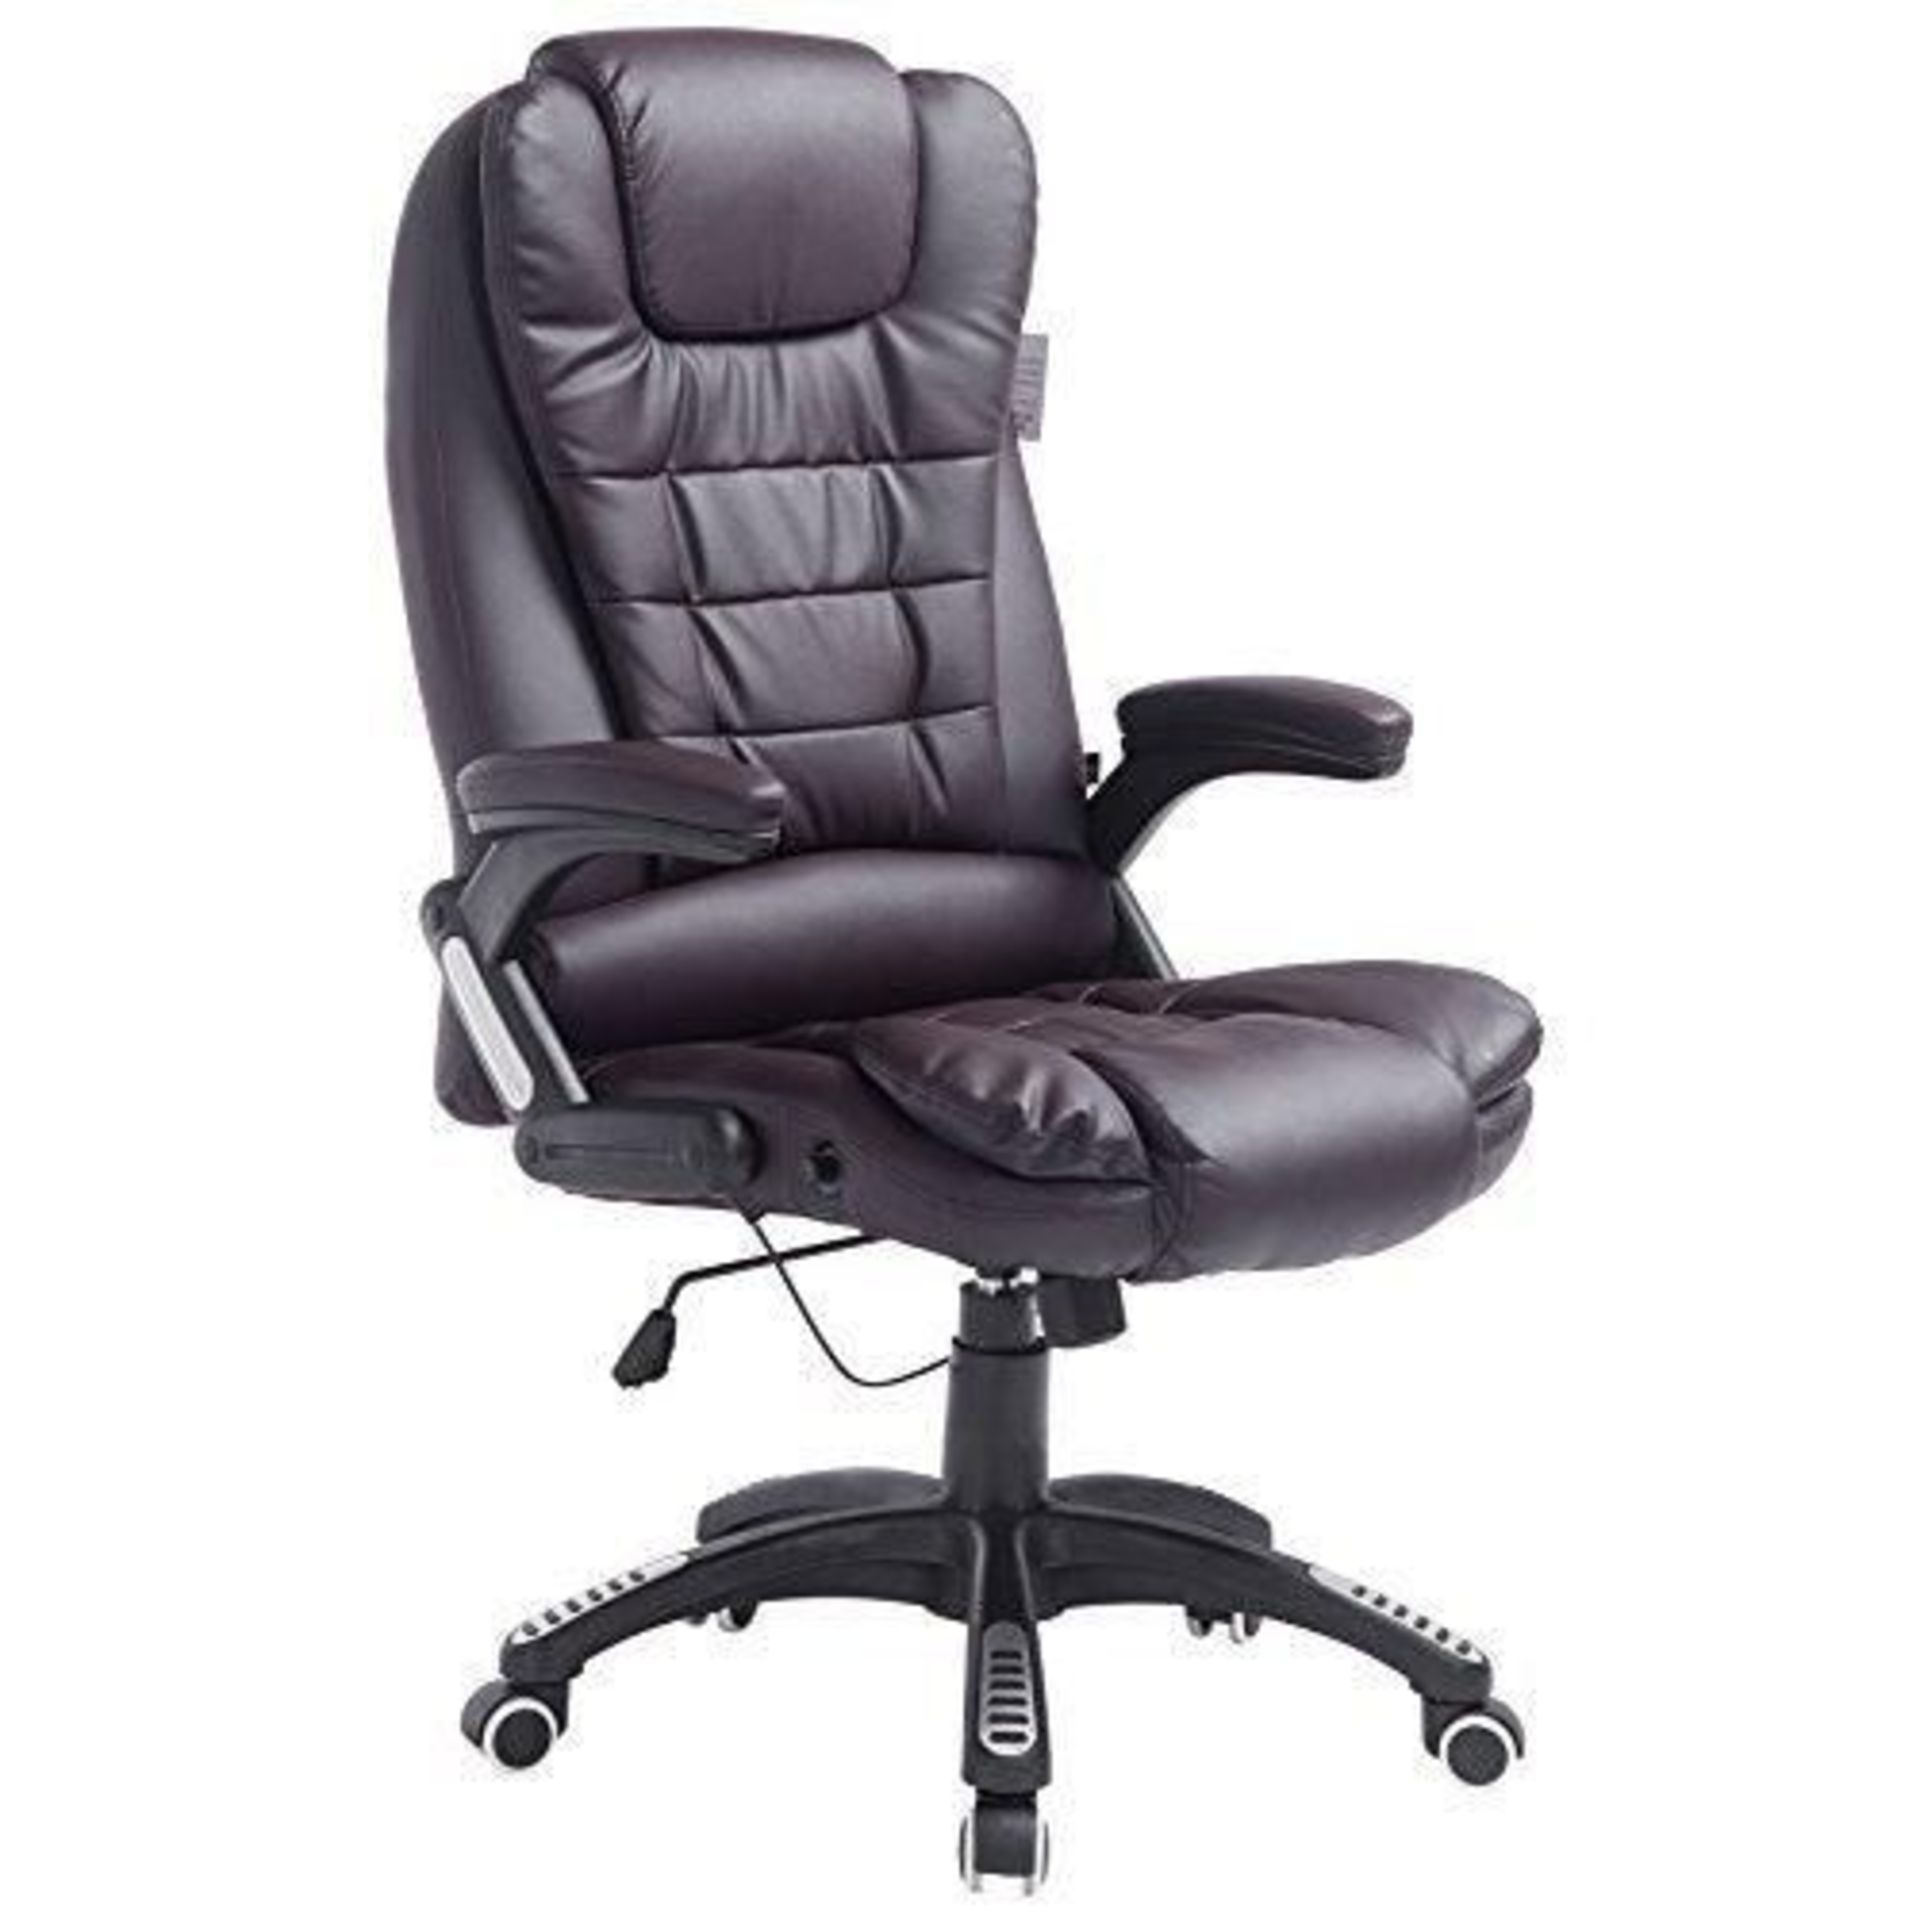 Executive Recline High Back Extra Padded Office Chair, MO17 Brown. -ER30. RRP £149.99.